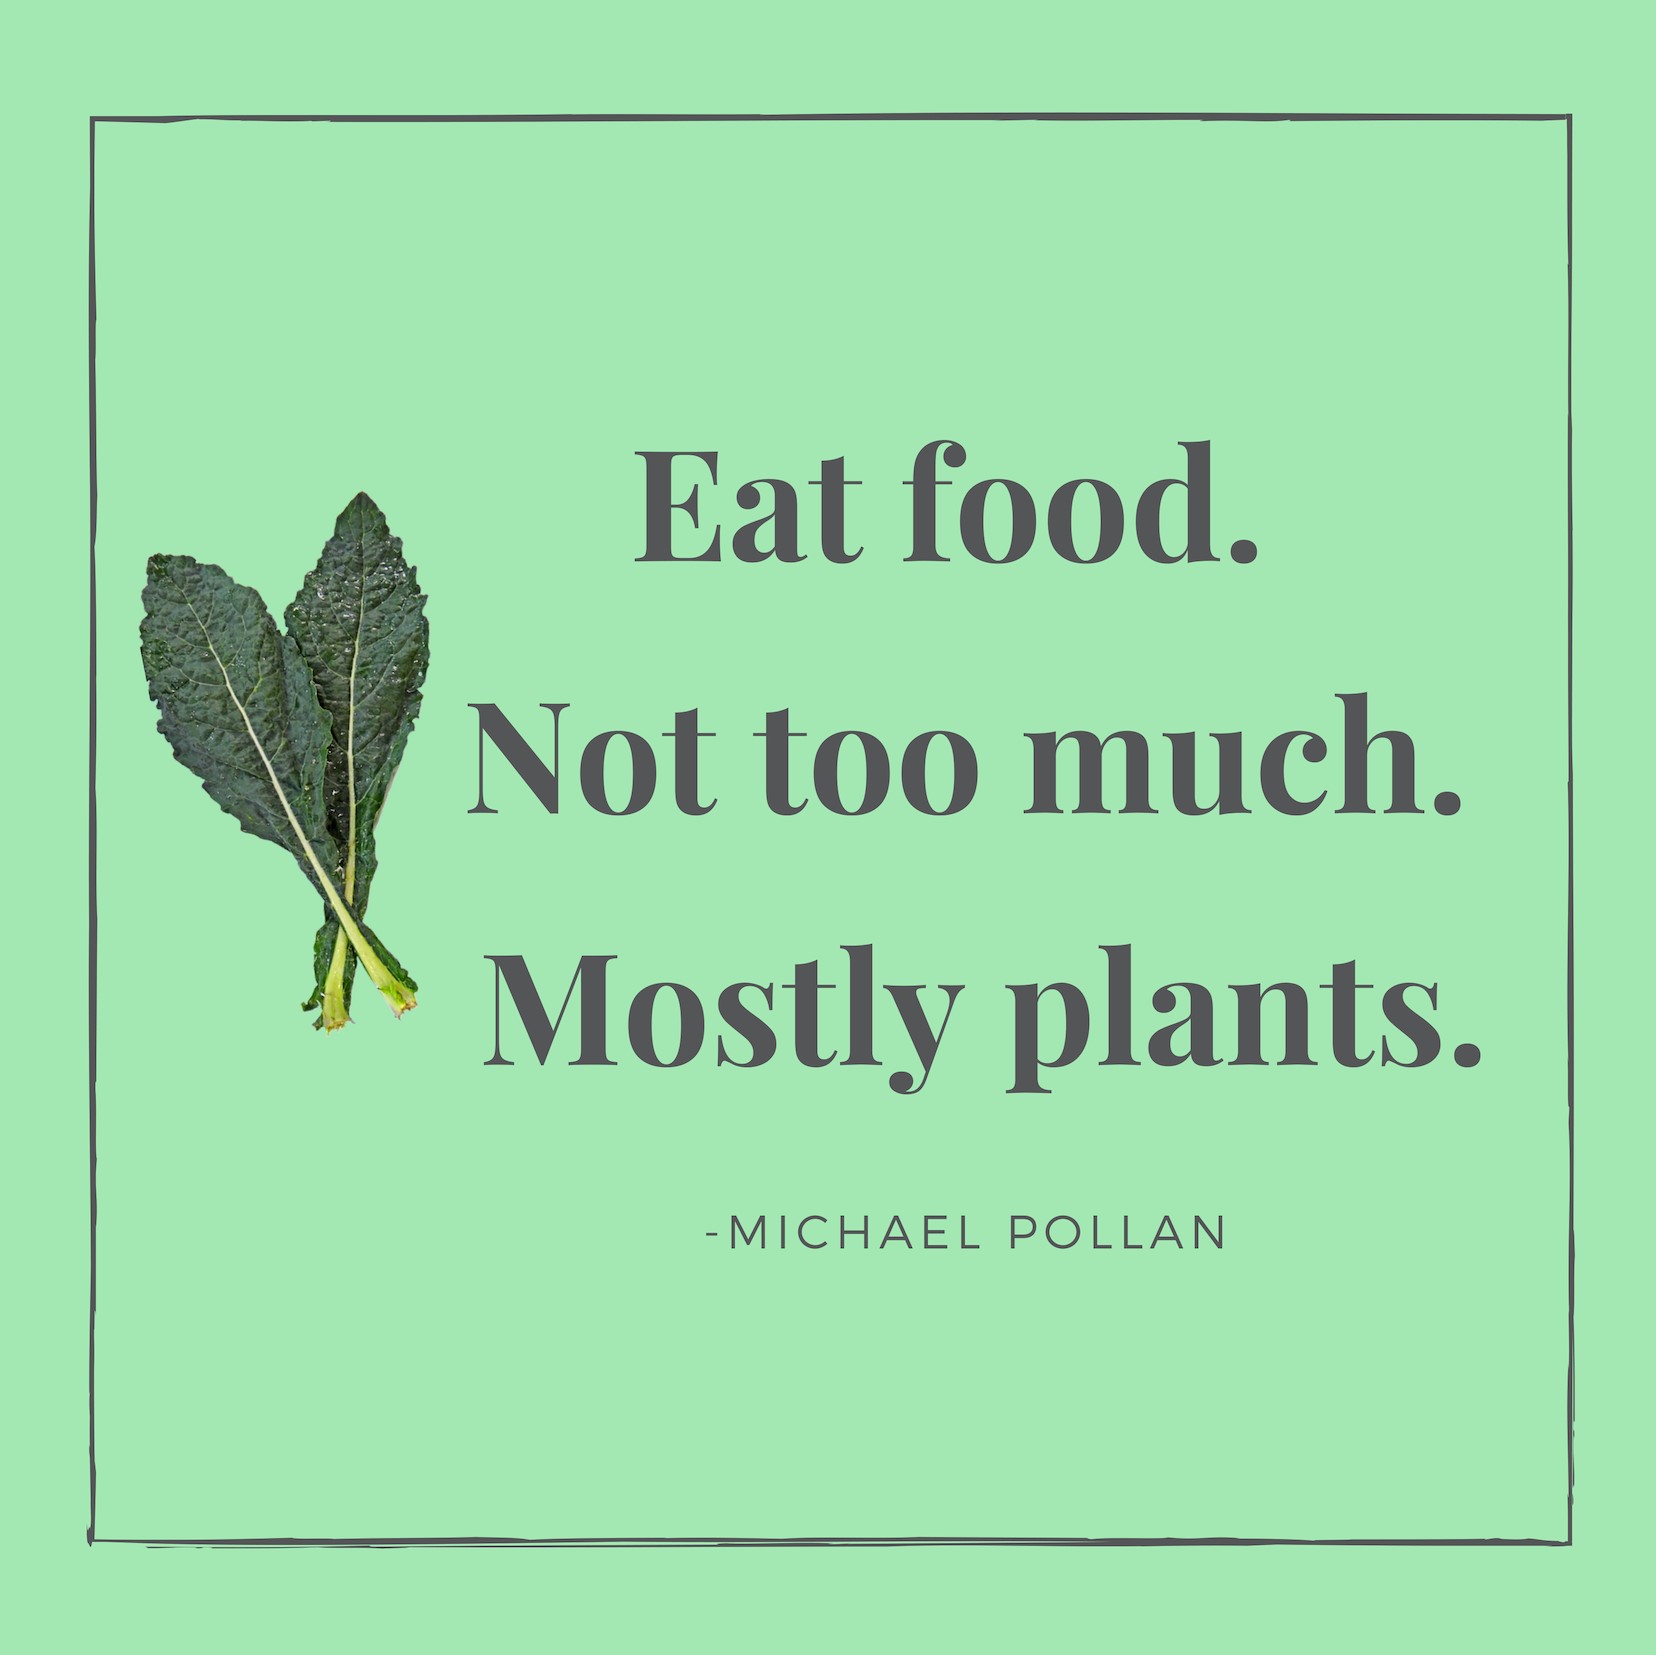 Eat food, not too much, mostly plants 